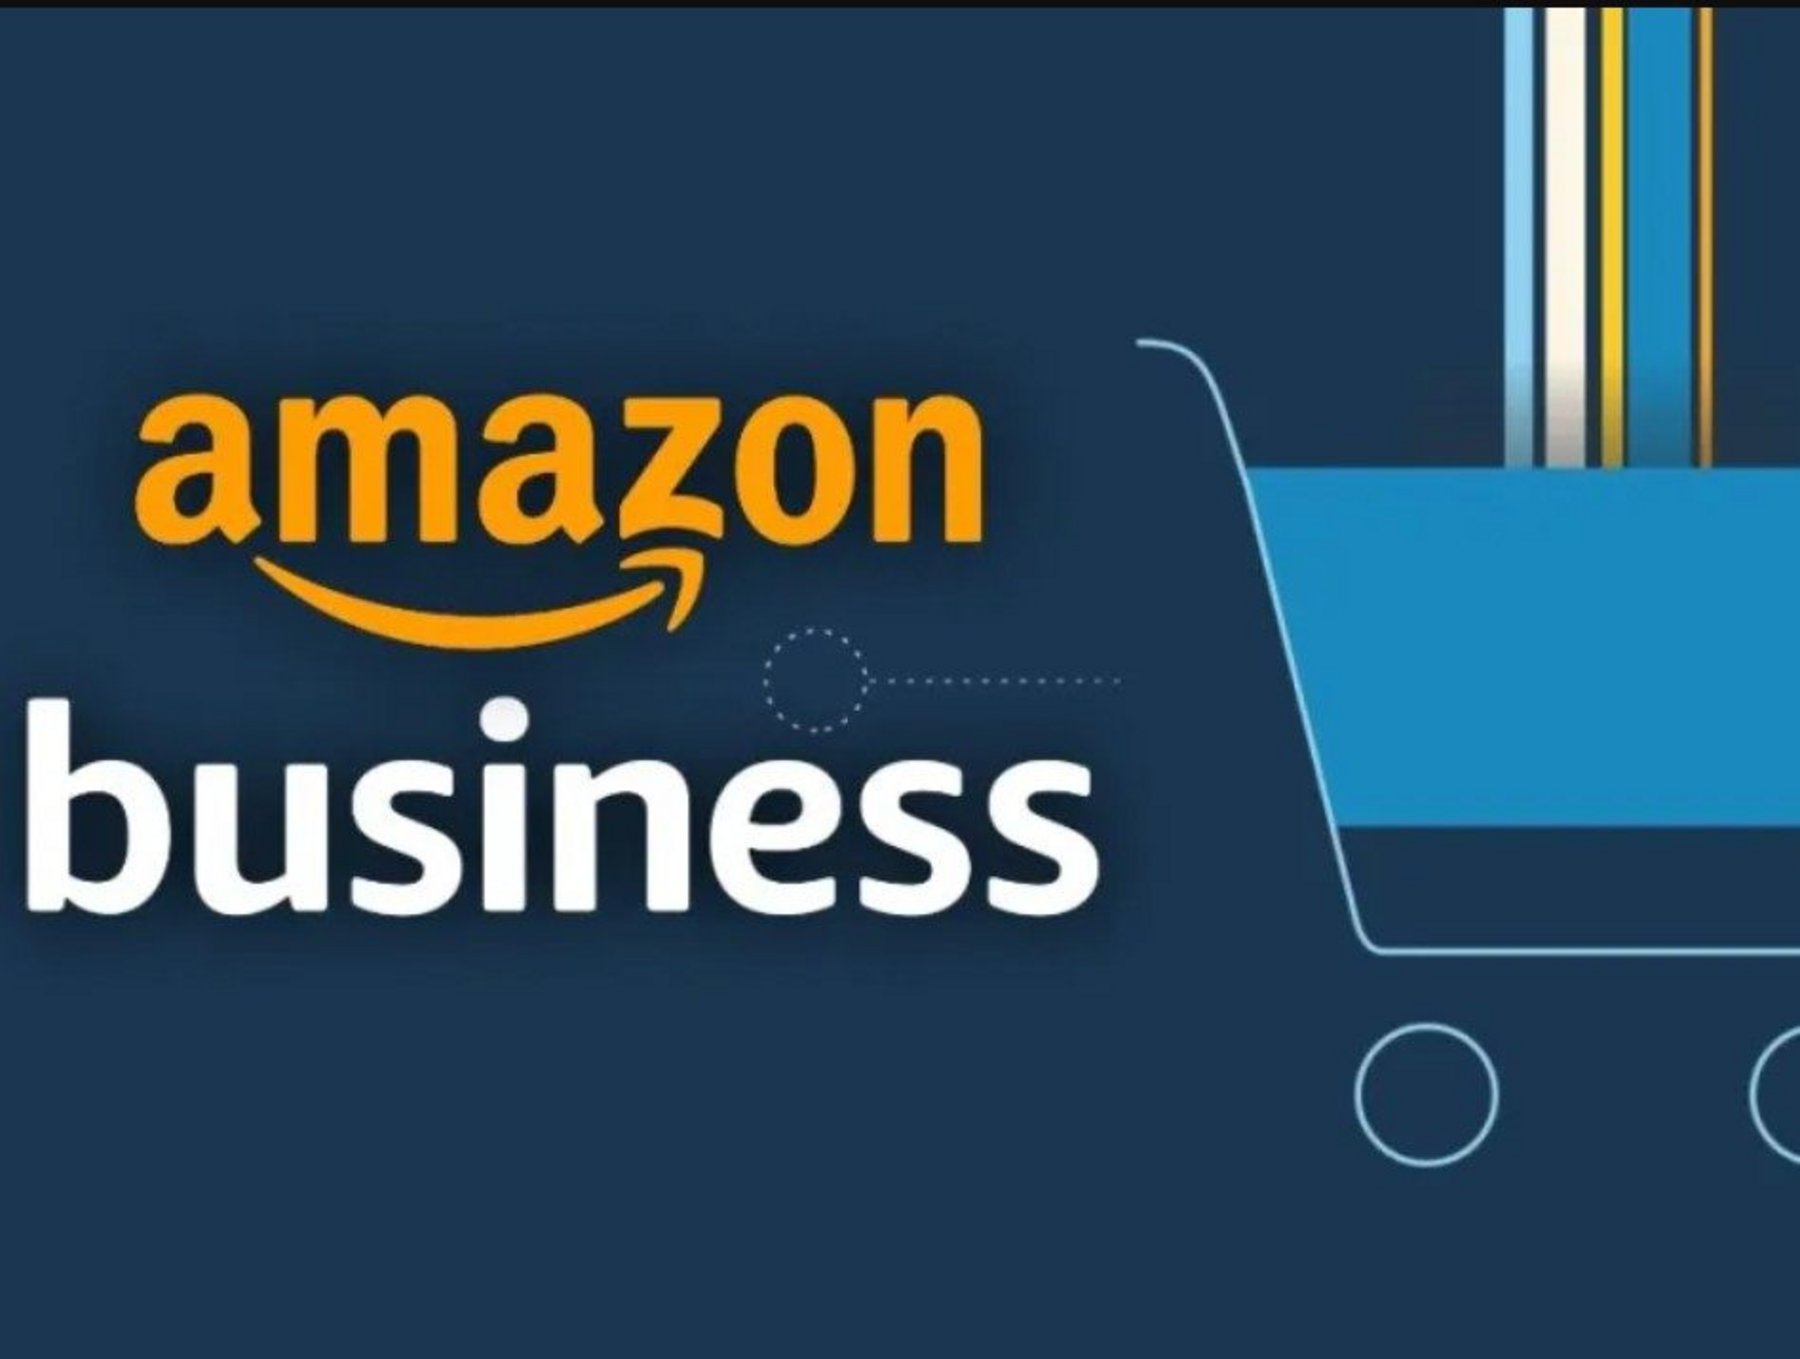 Amazon Business 'Buy Local' scheme is boost for procurement | Supply Chain  Digital